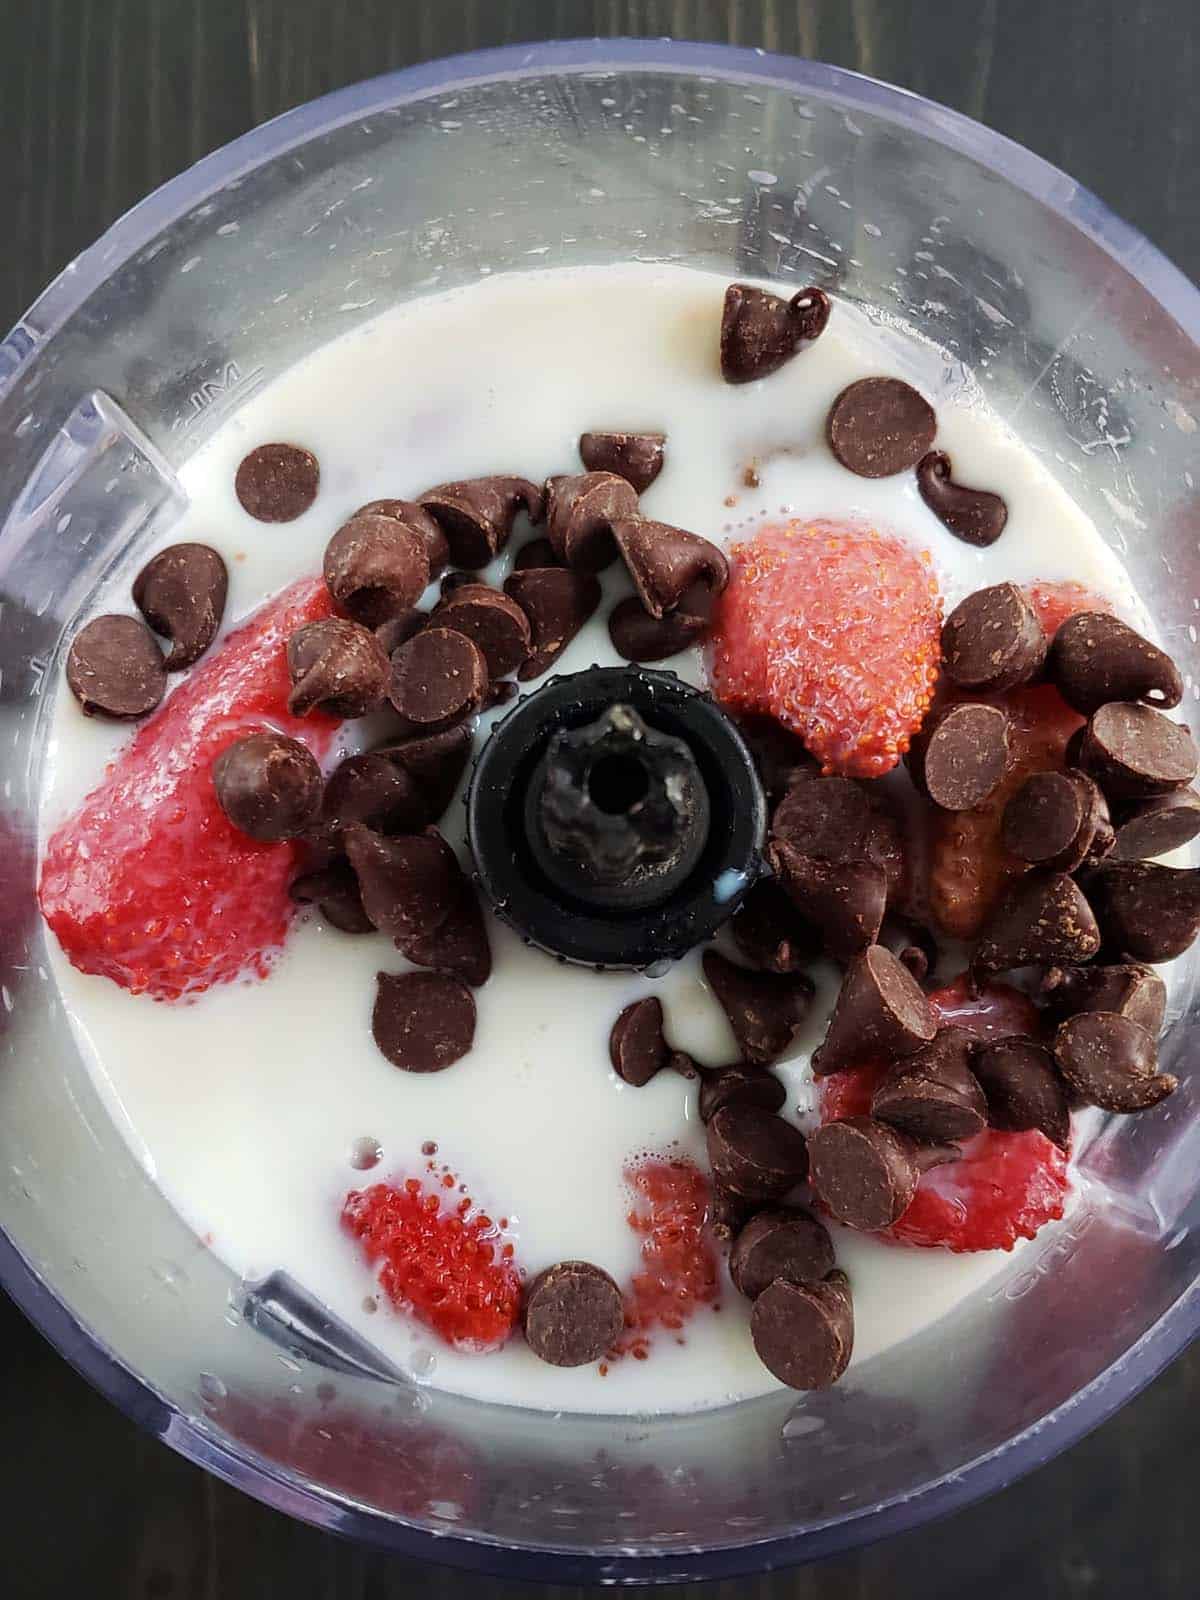 Milk, strawberries, and chocolate chips in a blender.